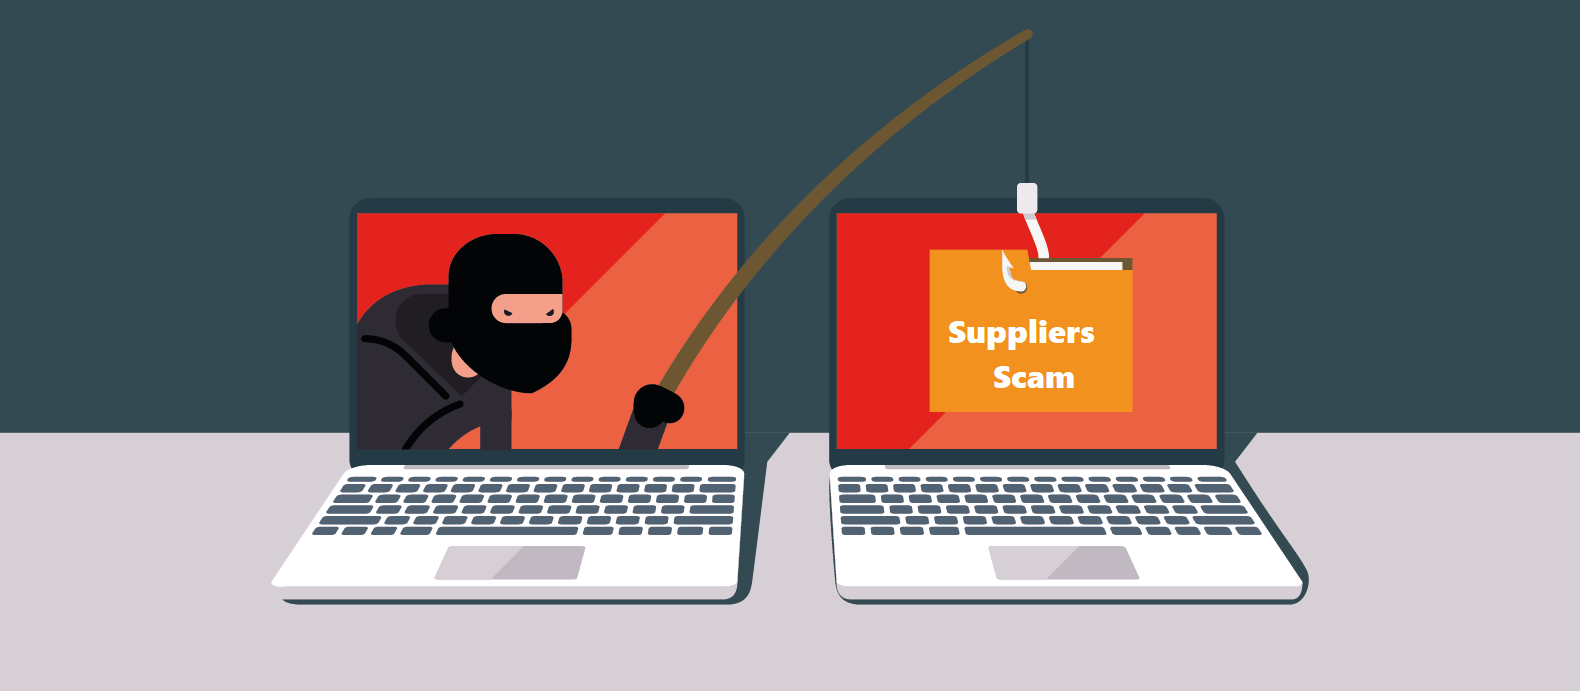 Learn To Steer Clear Of The Supplier Scams